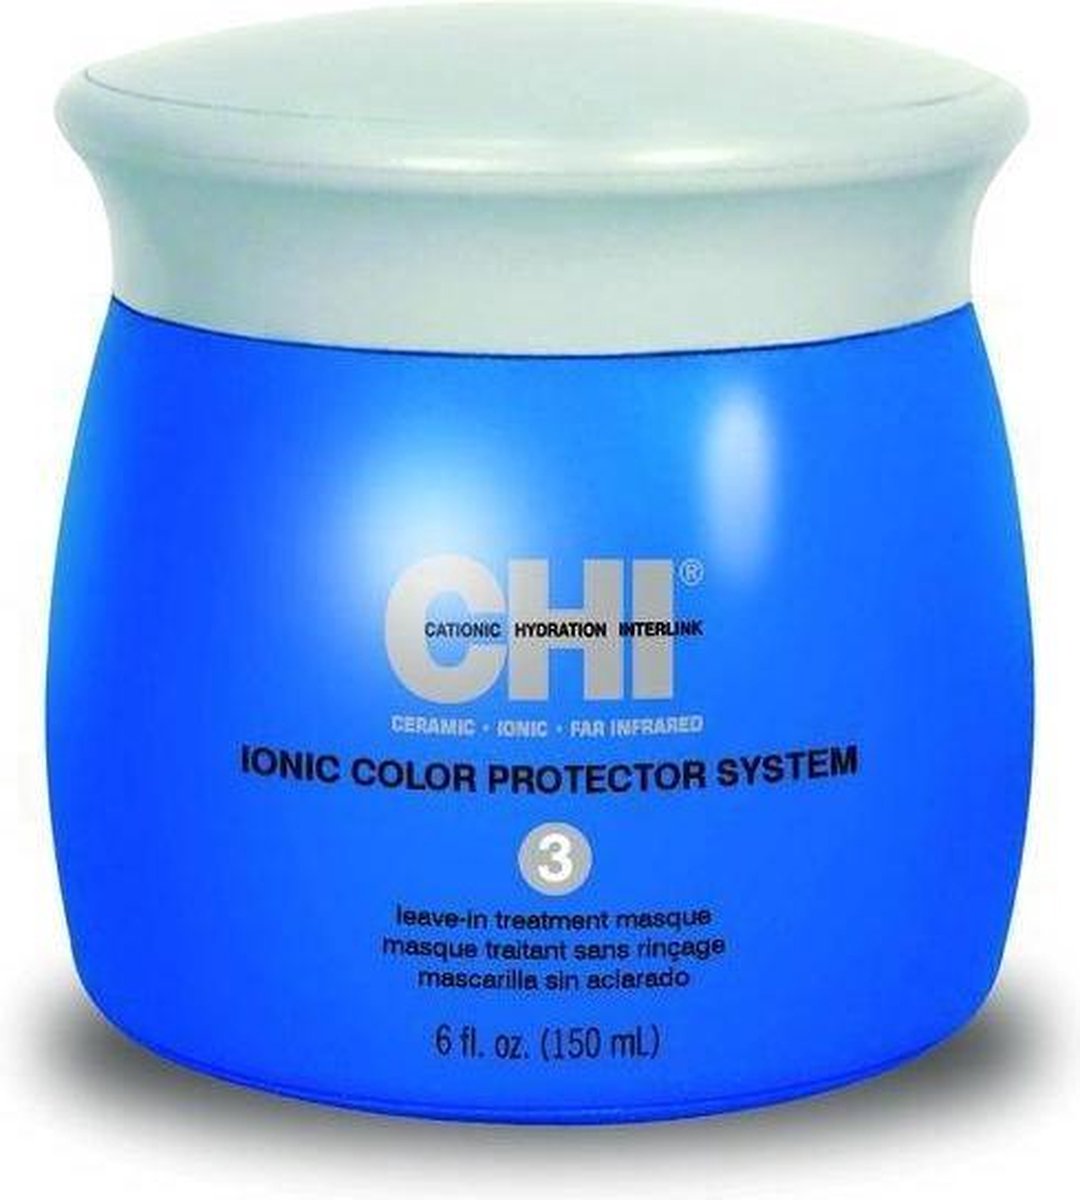 Chi Ionic Color Protector System Leave-in Treatment Masque Masker Stap 3 Gekleurd Haar 150ml